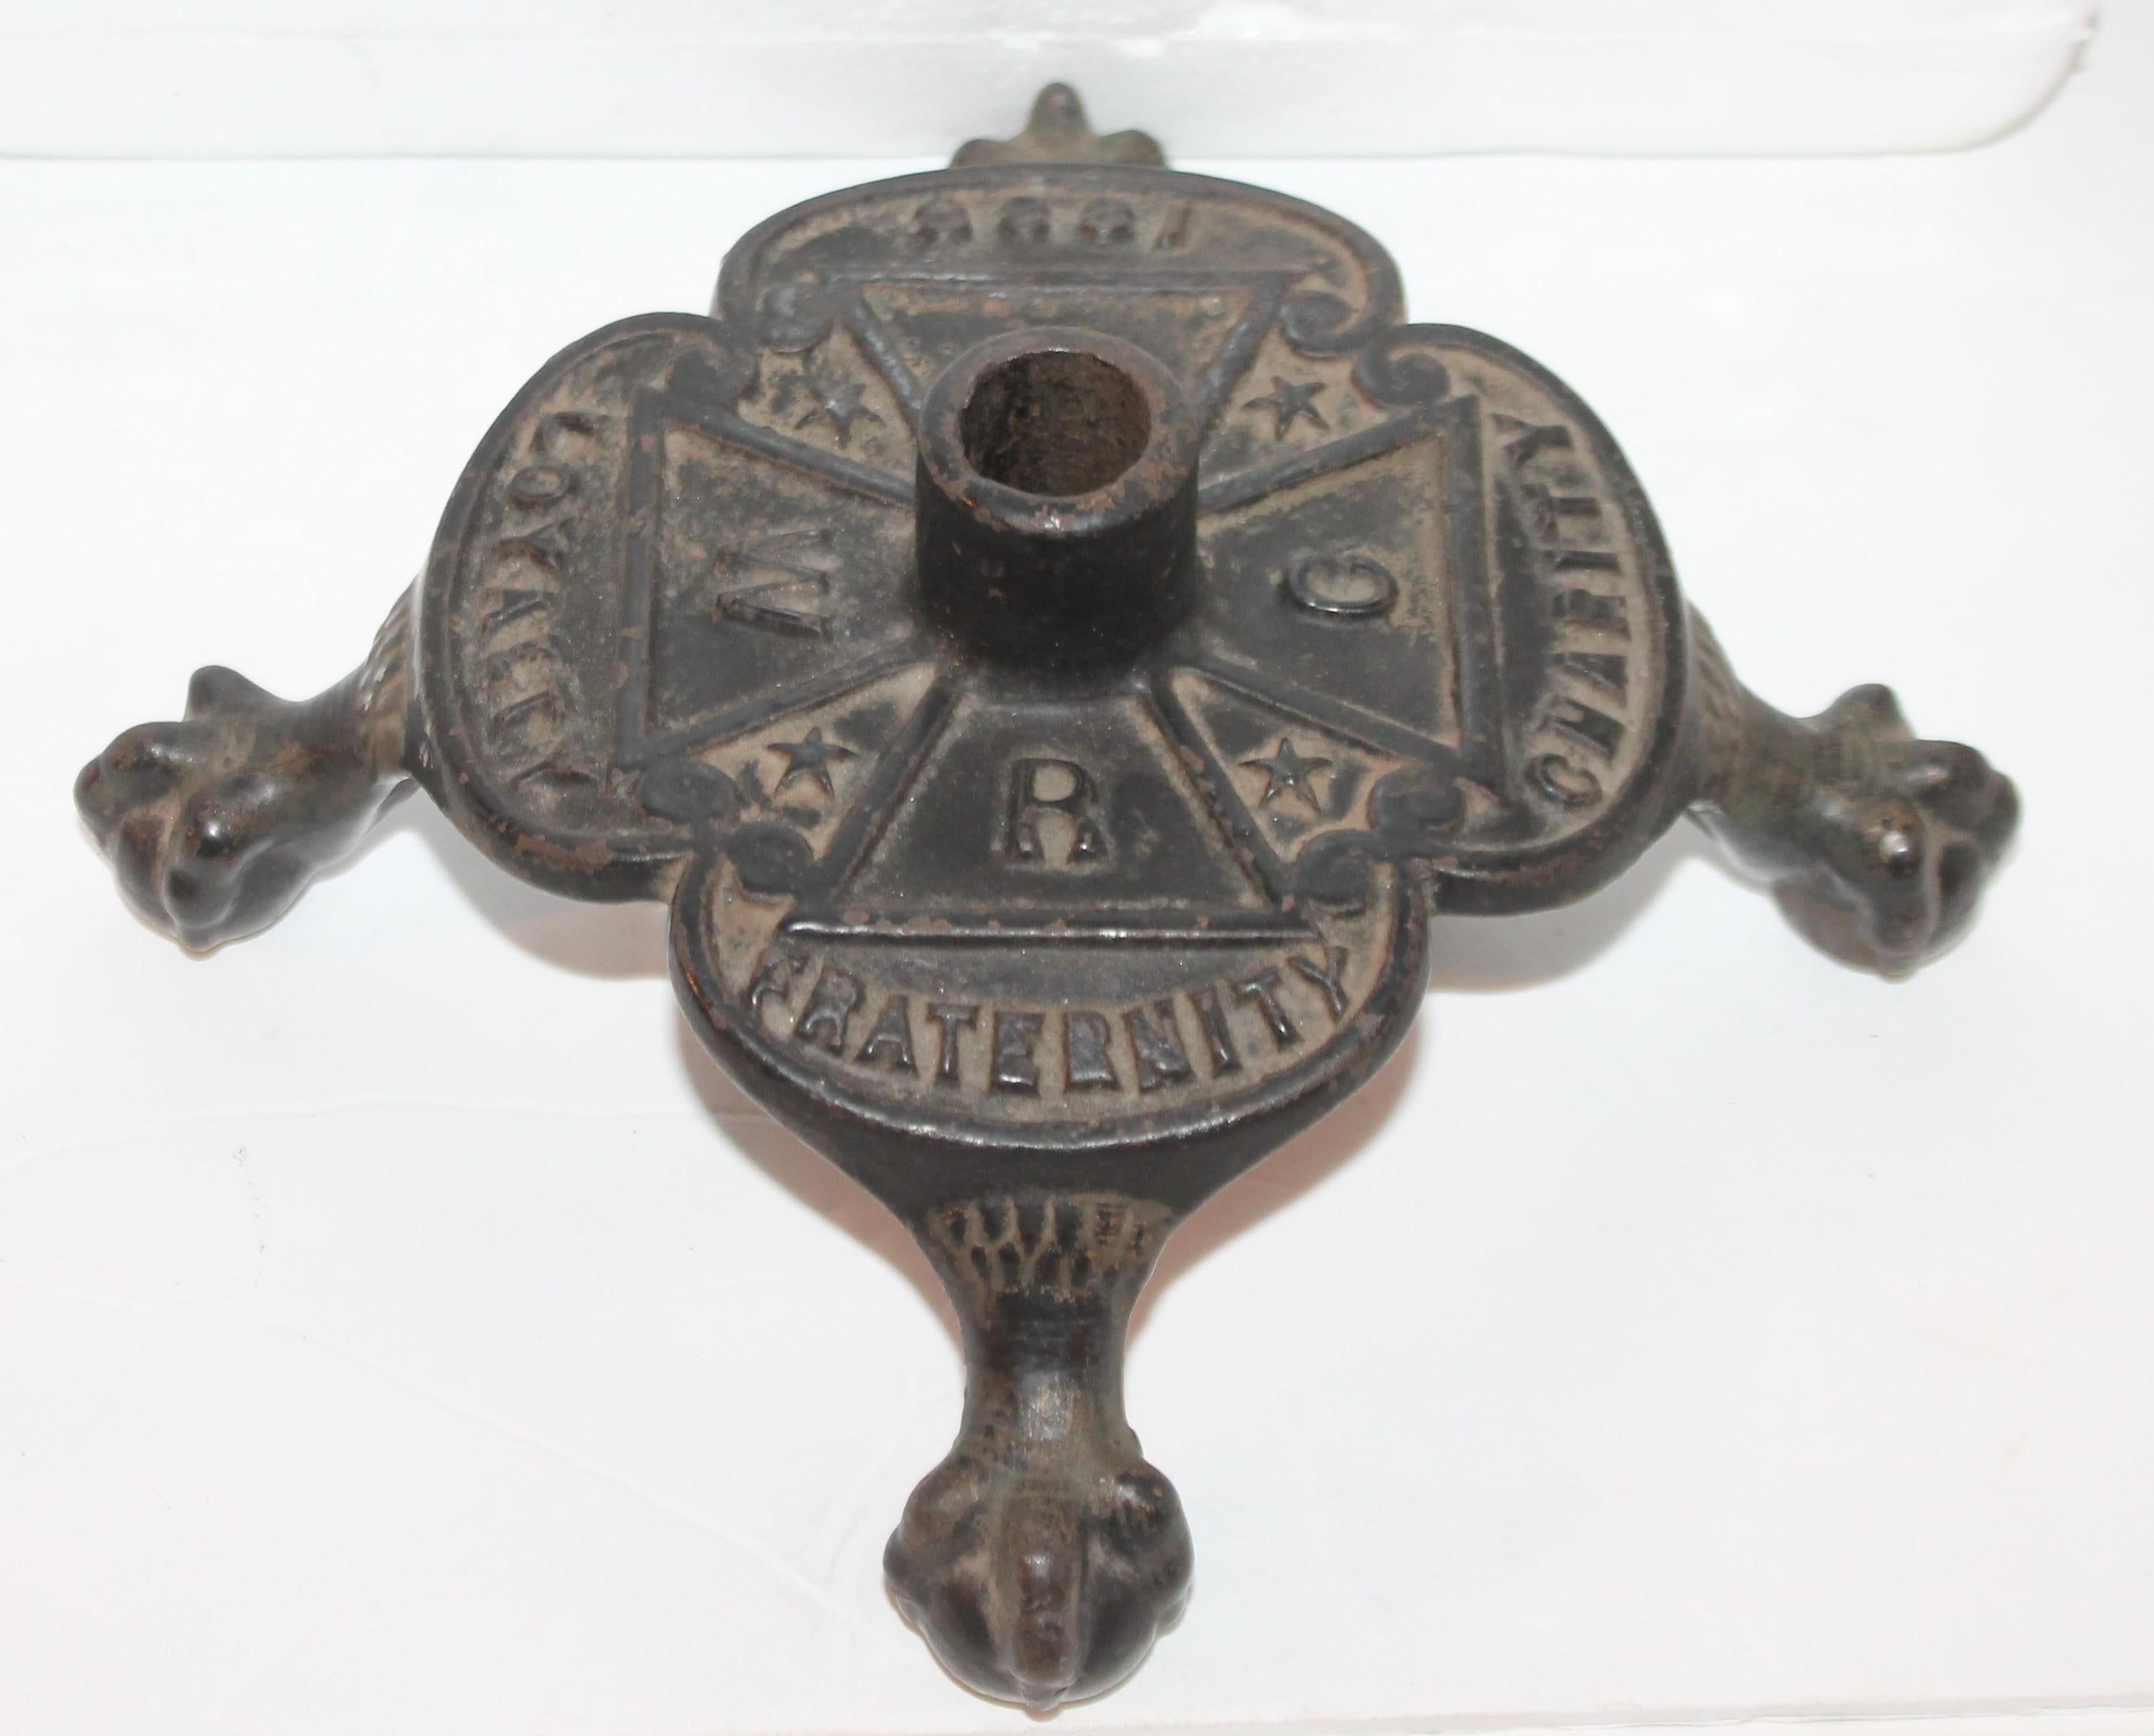 Masonic cast iron original black painted masonic flag holder with footed ball and claw feet. The condition is very good and strong.